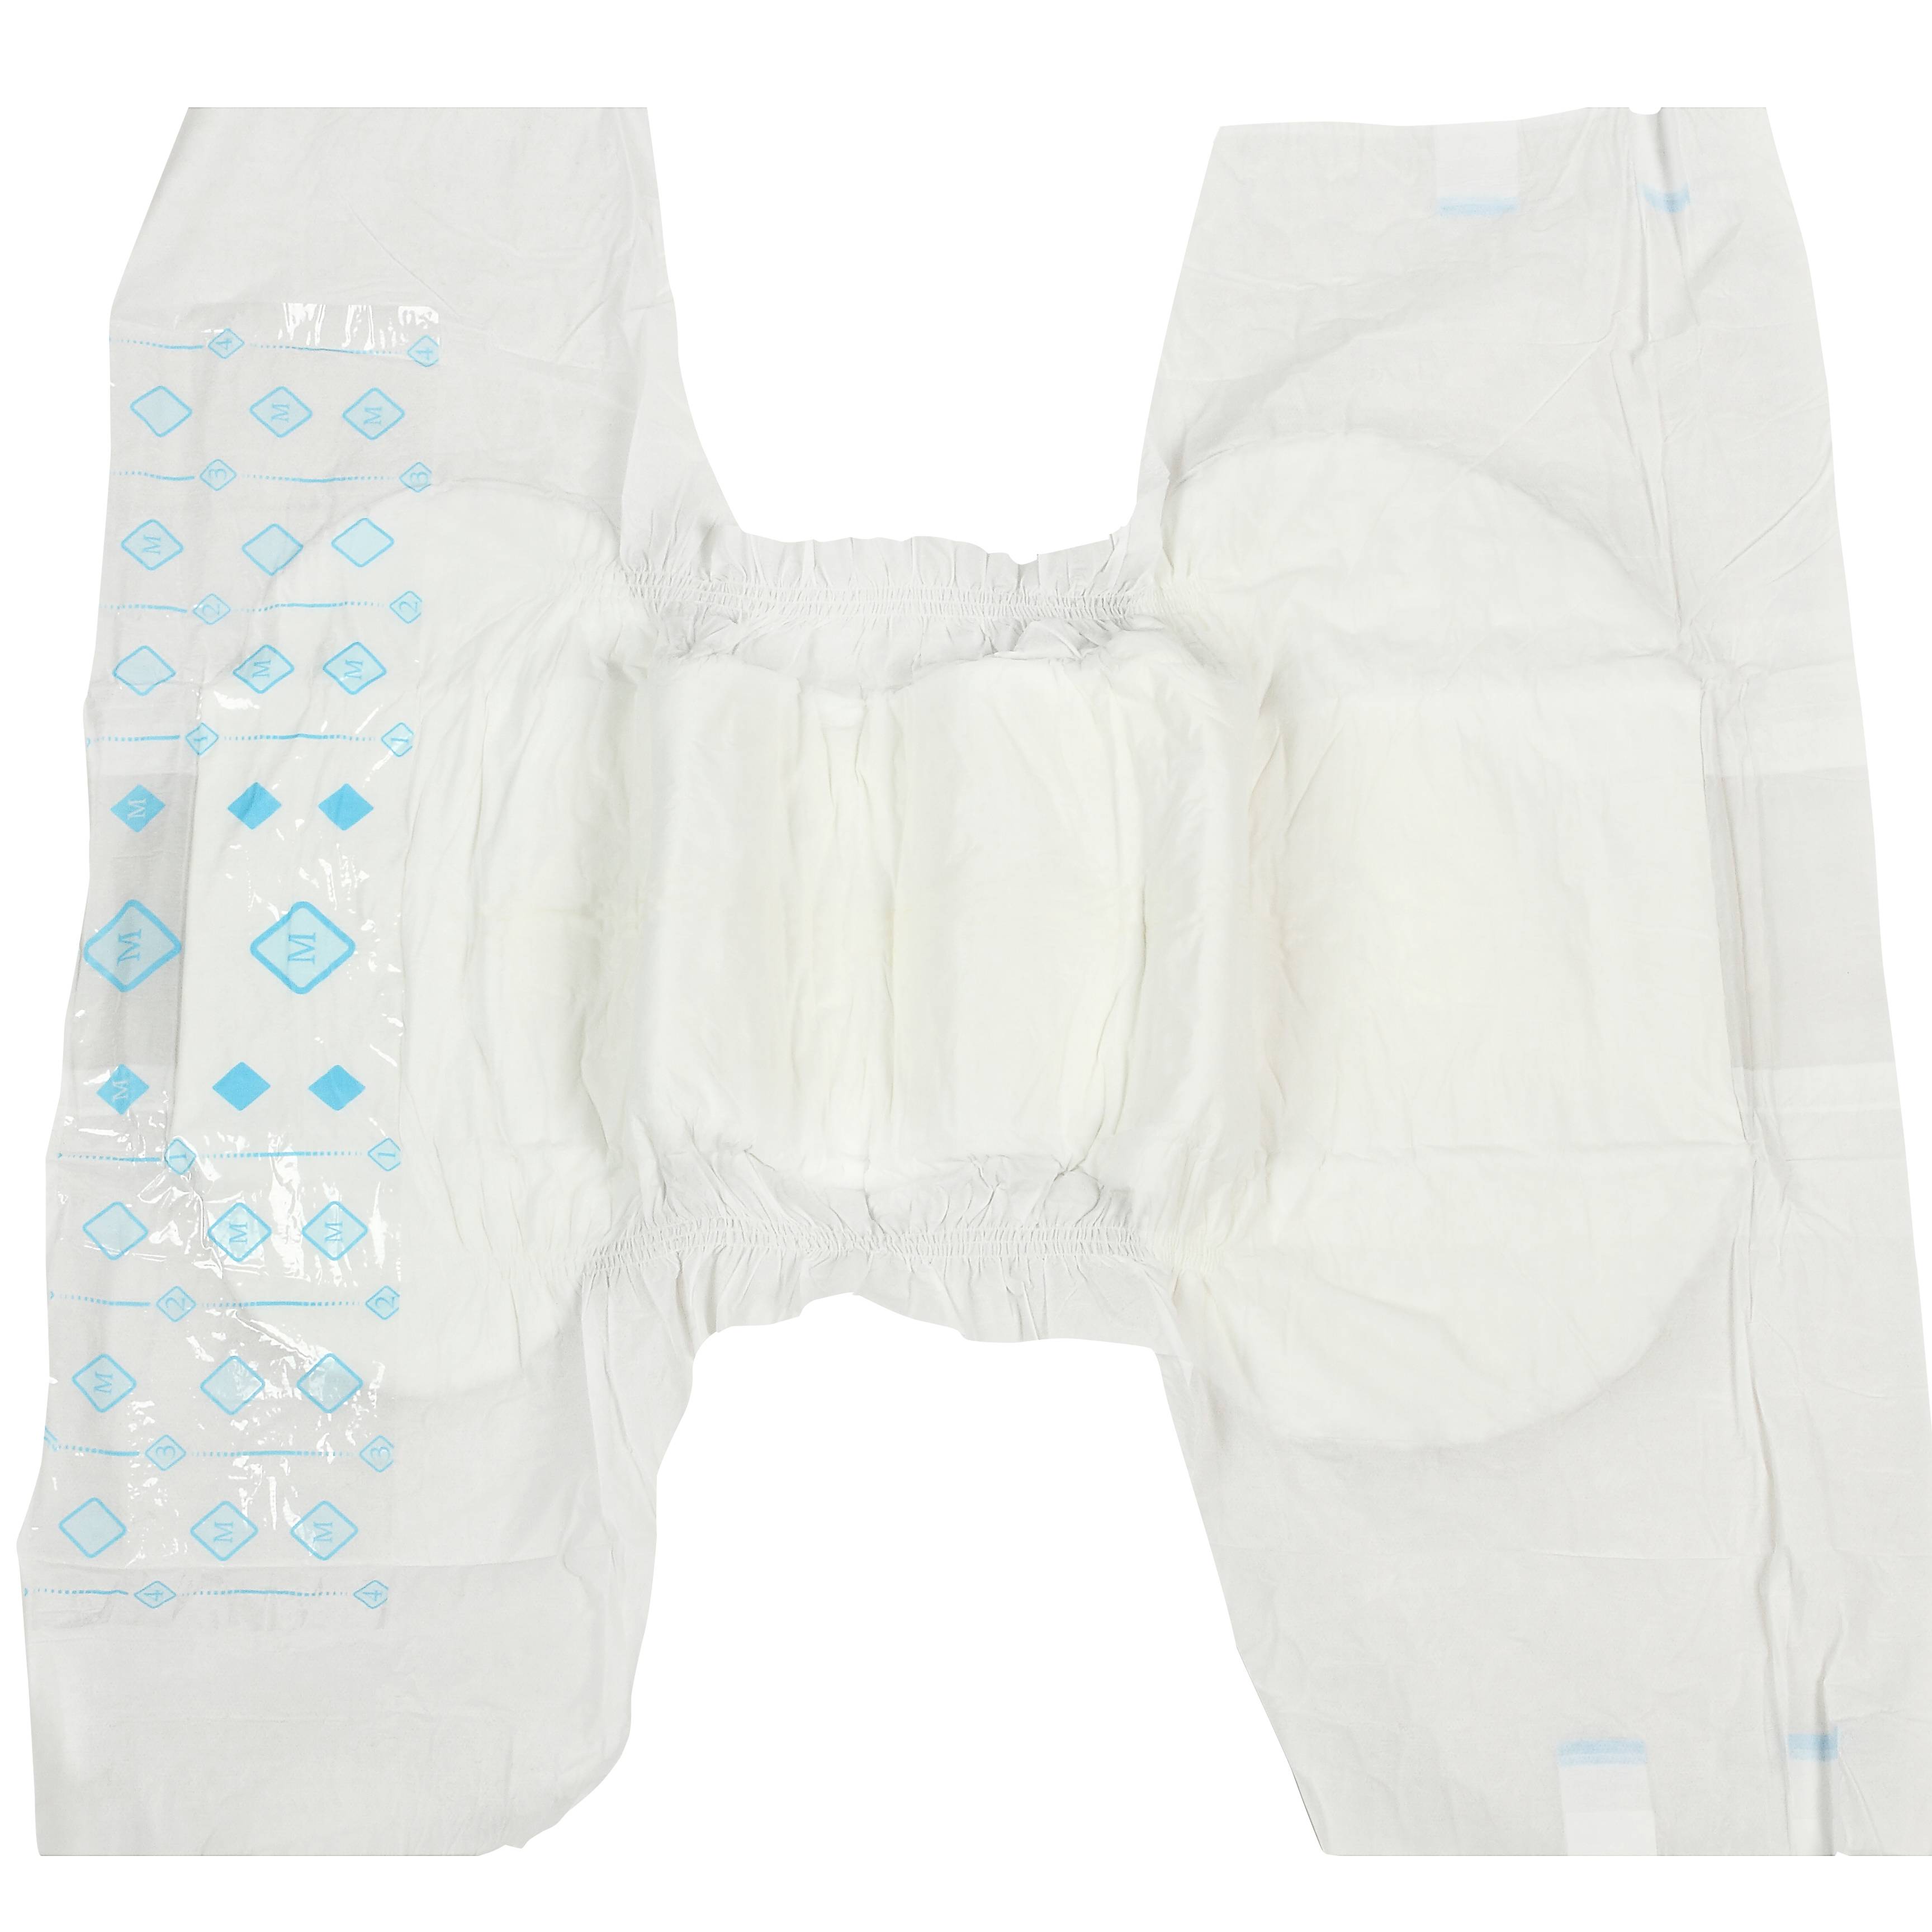 China Factory Price Disposable OEM Adult Diaper